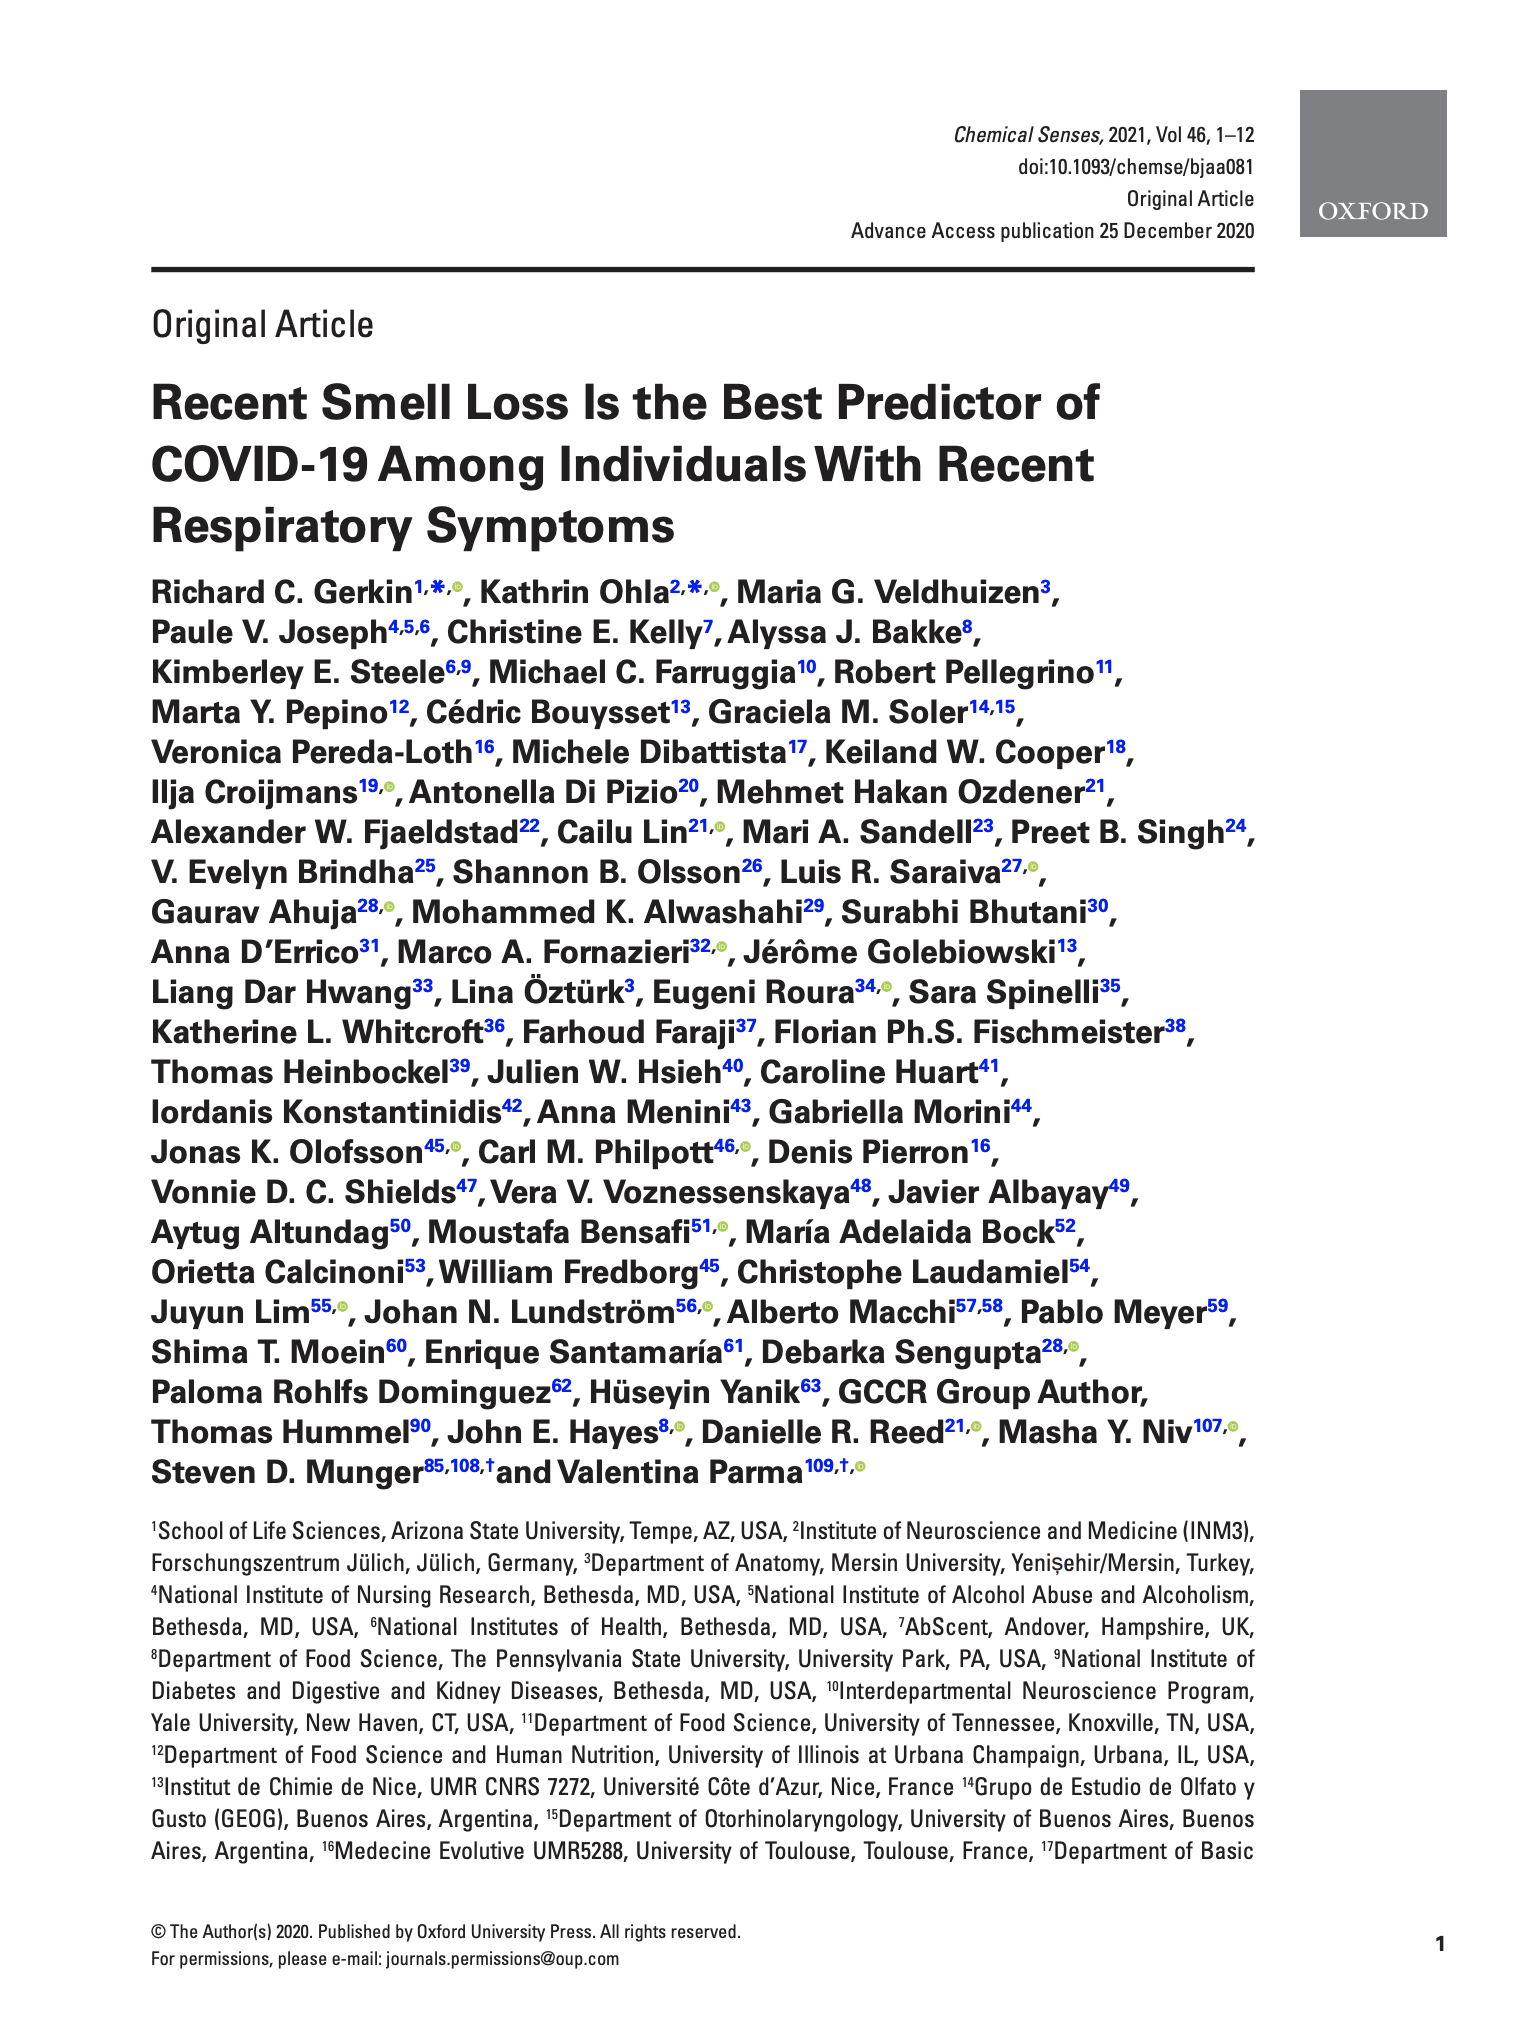 Recent Smell Loss Is the Best Predictor of COVID-19 Among Individuals With Recent Respiratory Symptoms